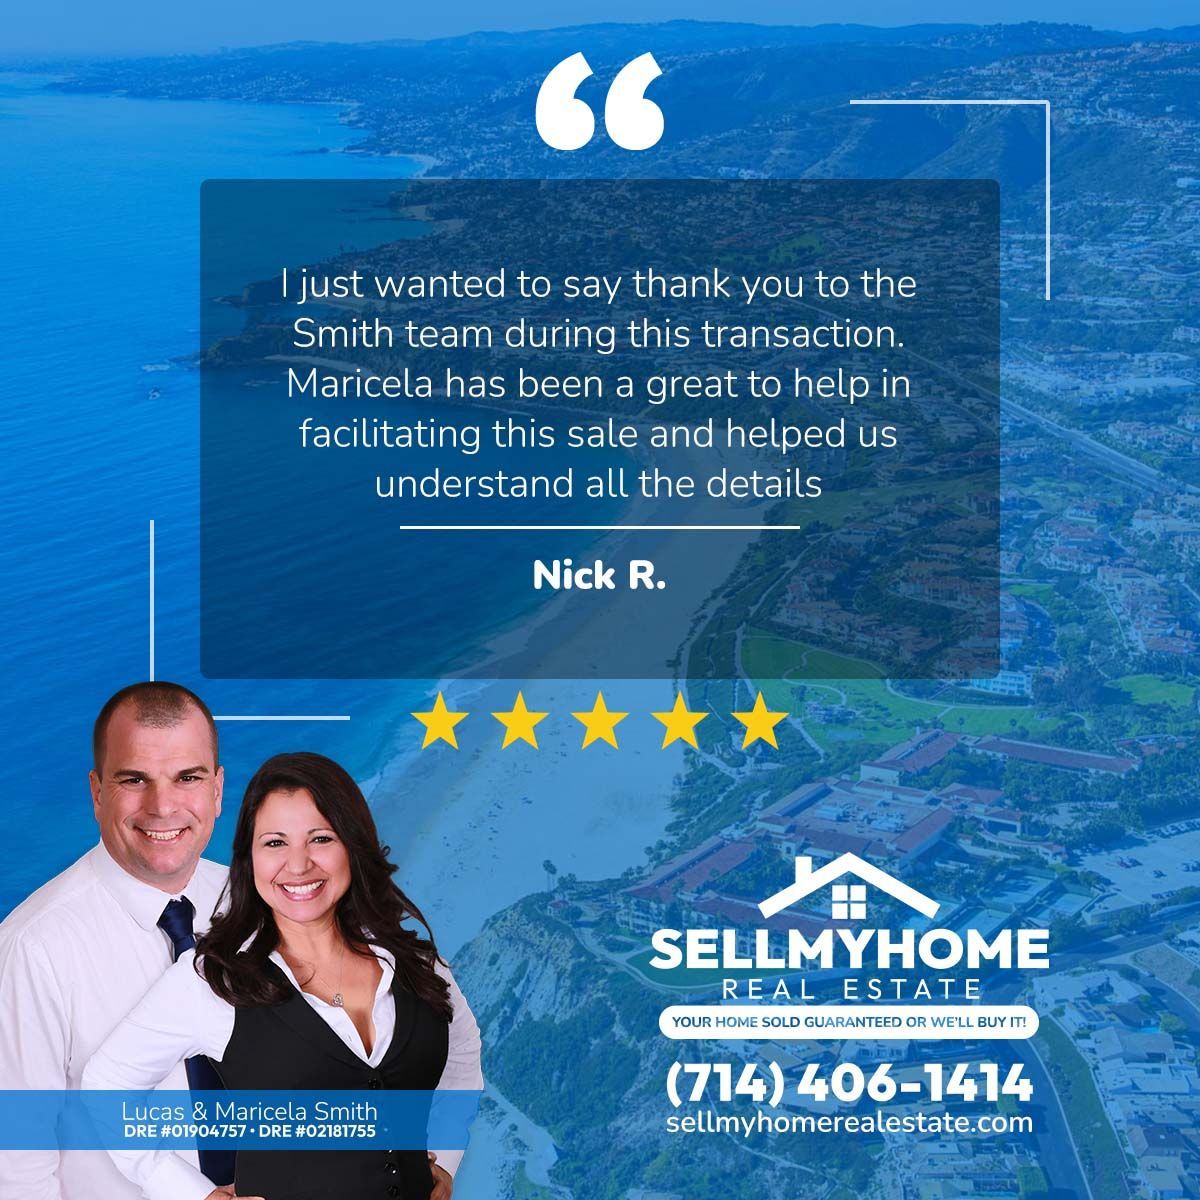 We're happy to serve our clients and help them achieve their heart's desire. If you've worked with us before, please consider leaving us a review: buff.ly/3yzay3g

#realestate #realestateagent #realestateexpert #sellmyhome #testimonialtuesday